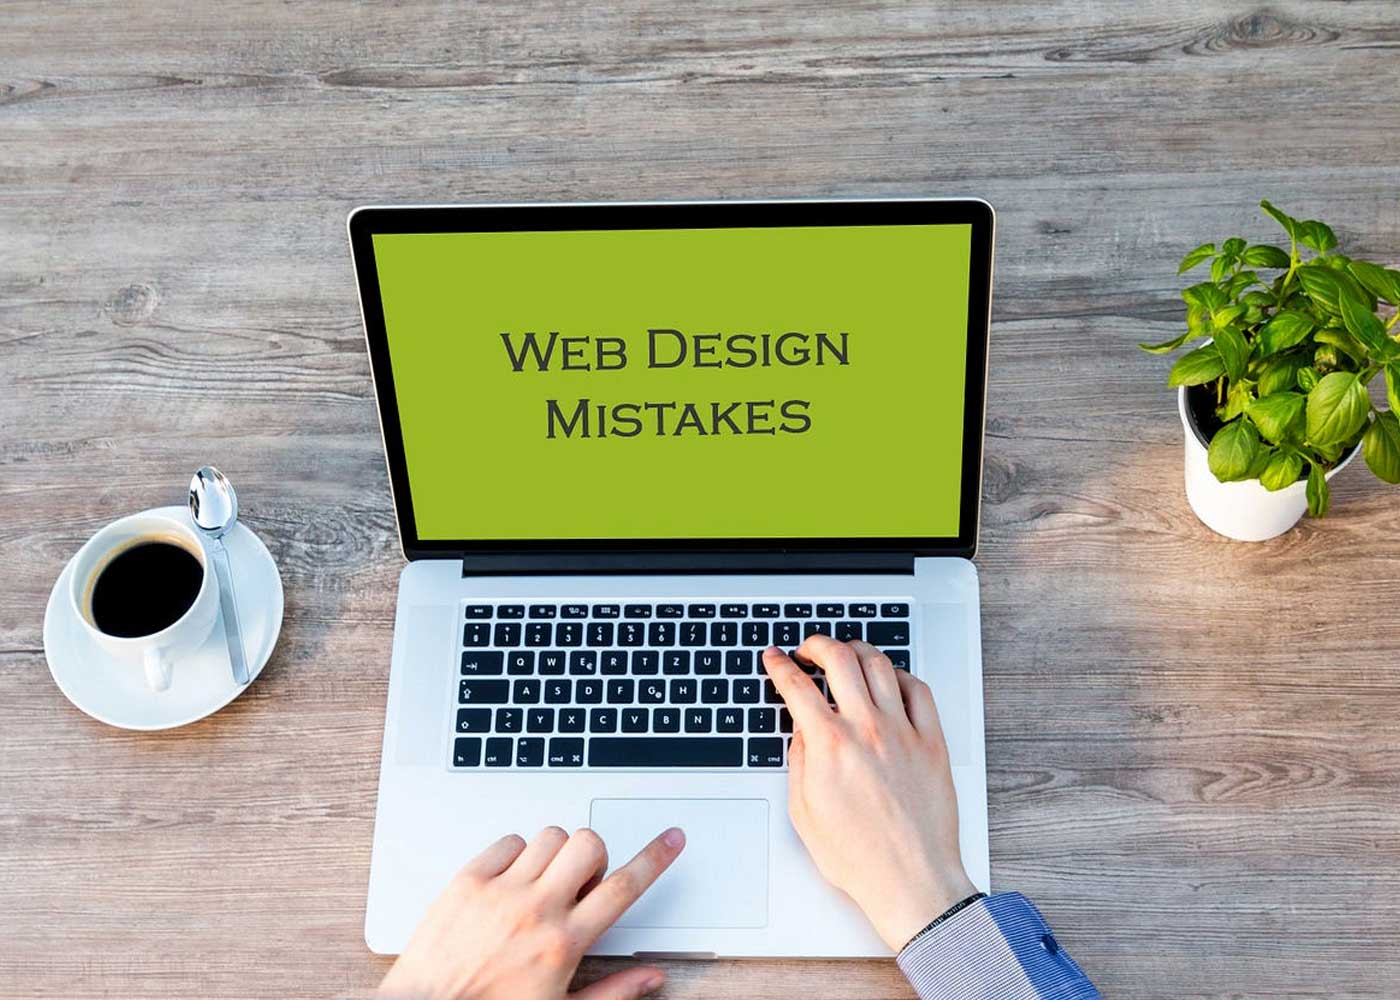 Common Web Design Mistakes and How to Avoid Them